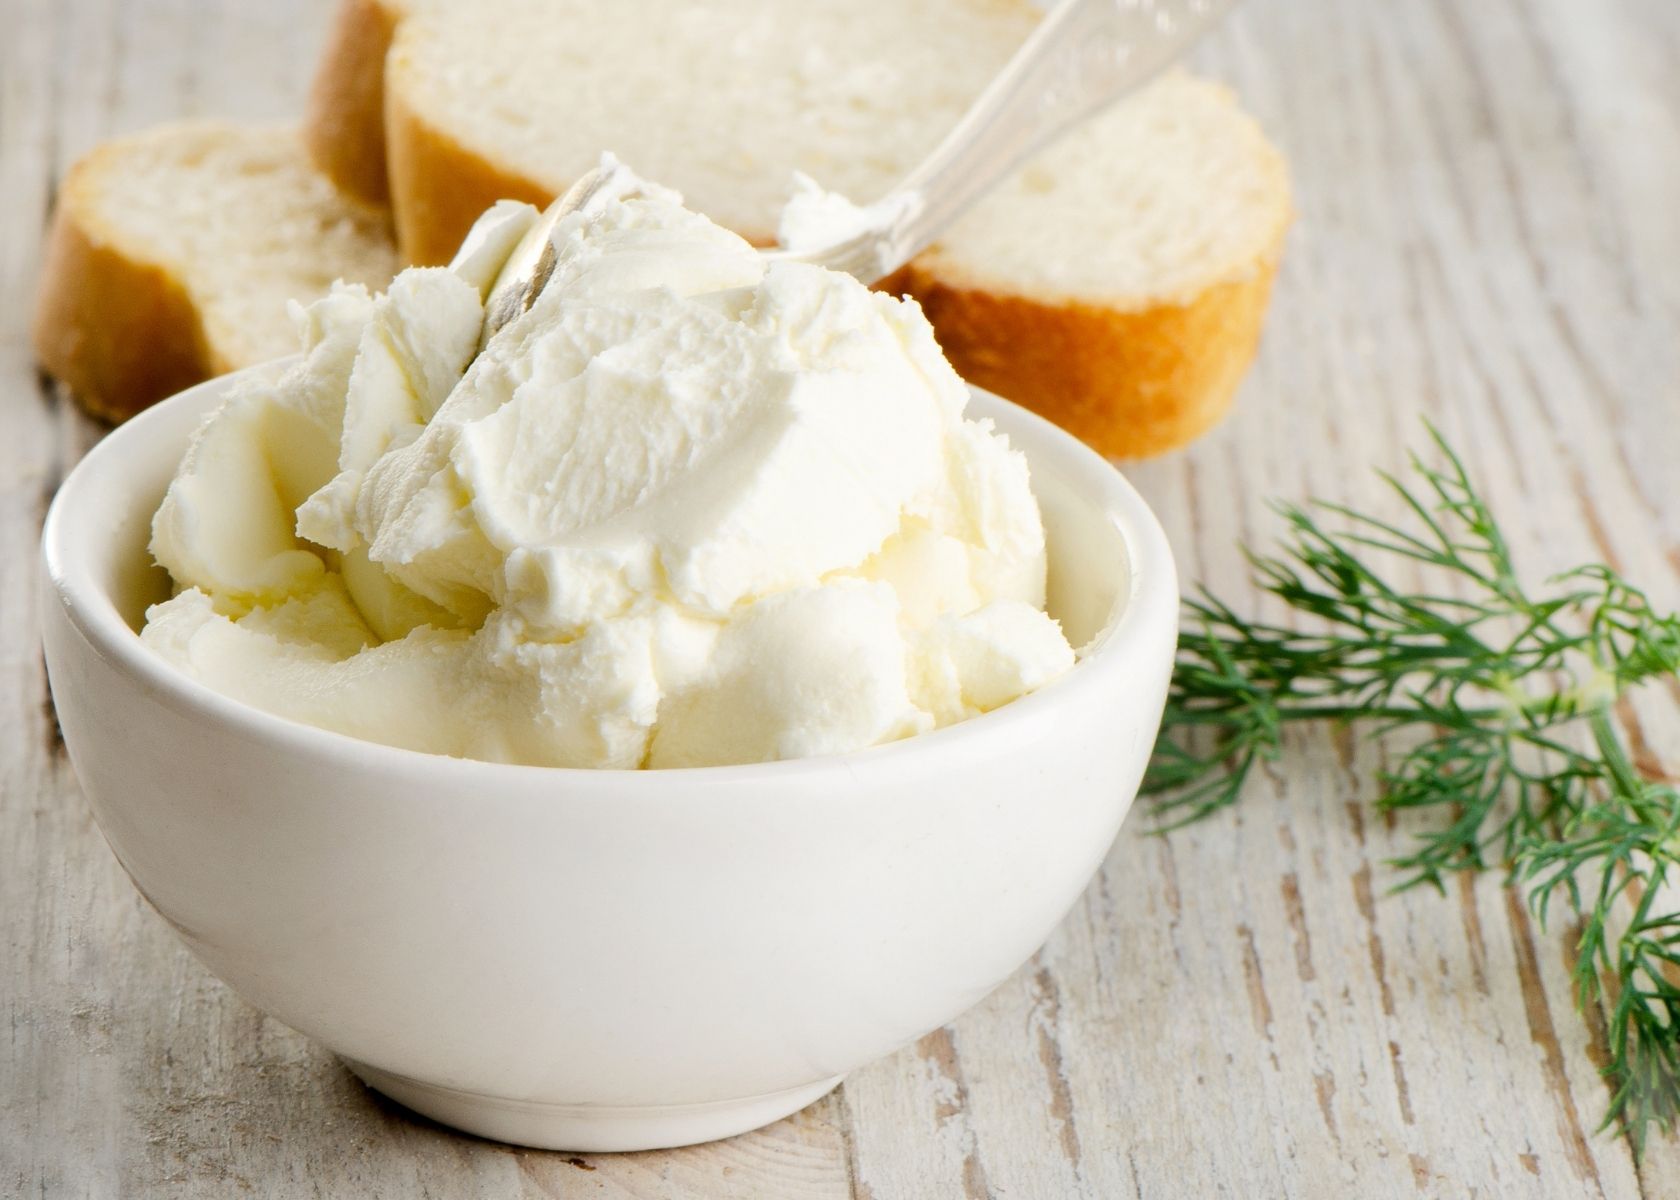 Cream cheese piled high in white bowl next to bread and garnish.